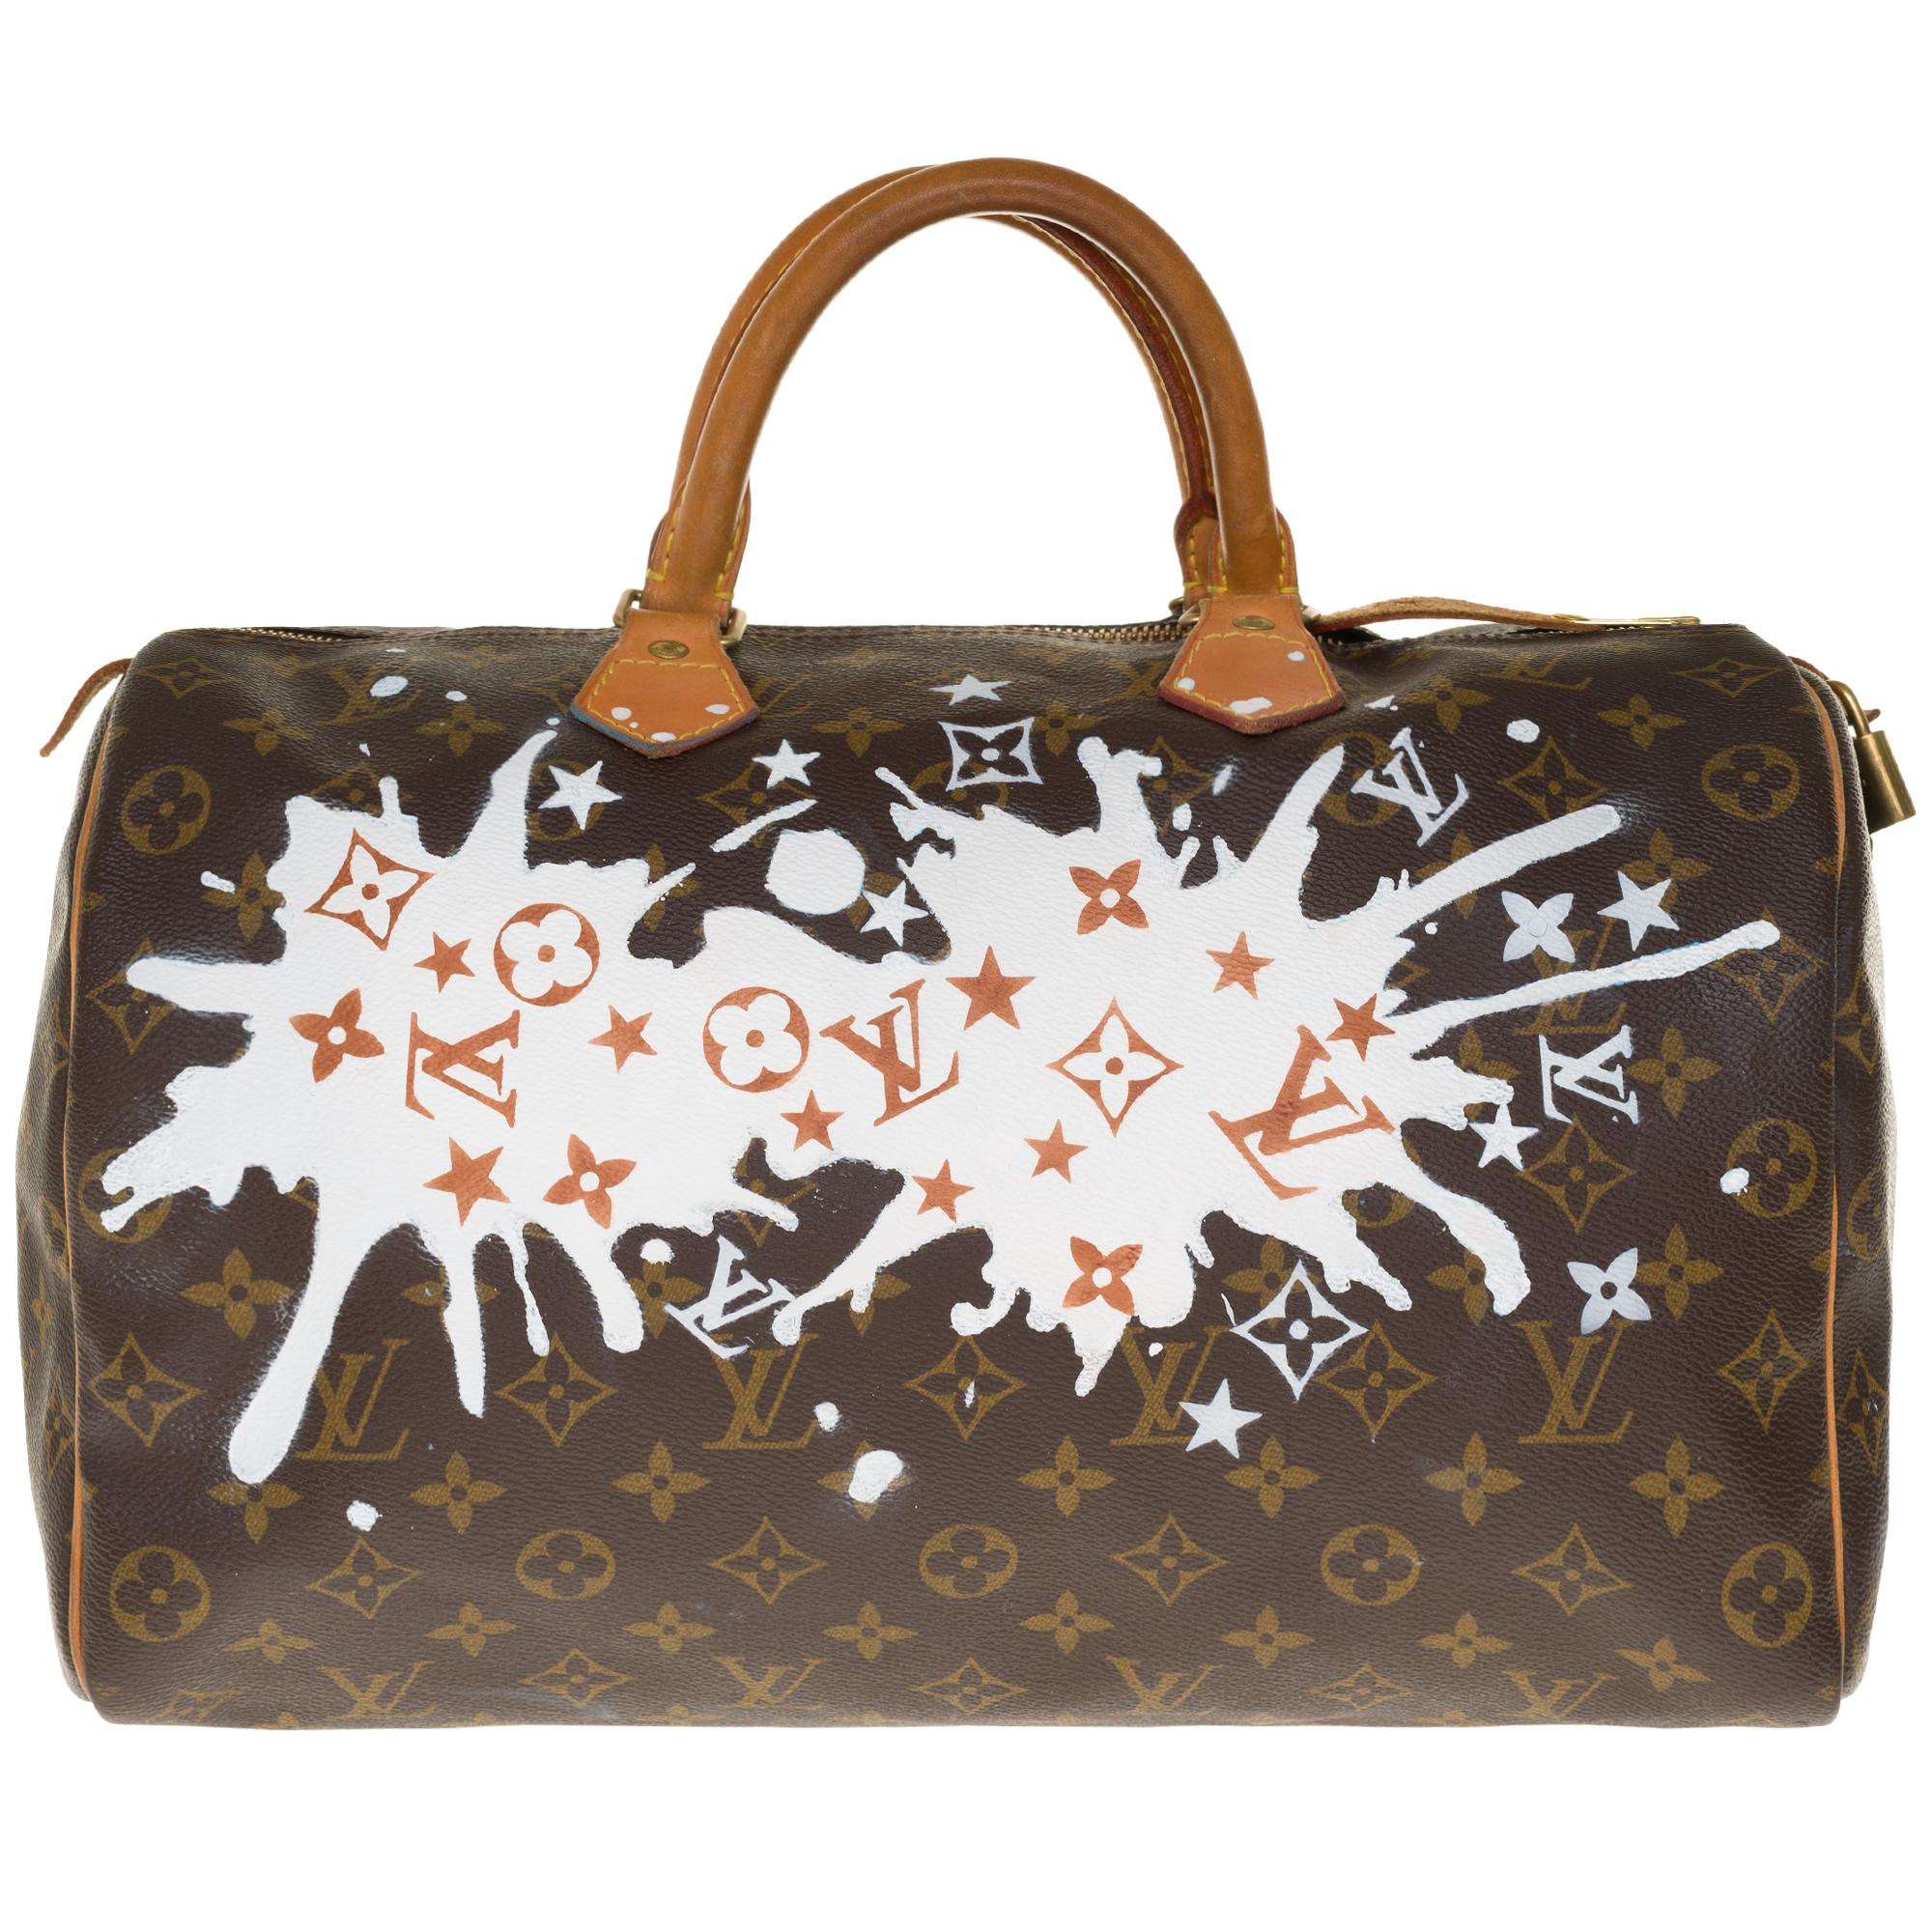 Louis Vuitton Speedy 35 handbag in Monogram canvas customized by the popular artist of Street Art PatBo with his work 